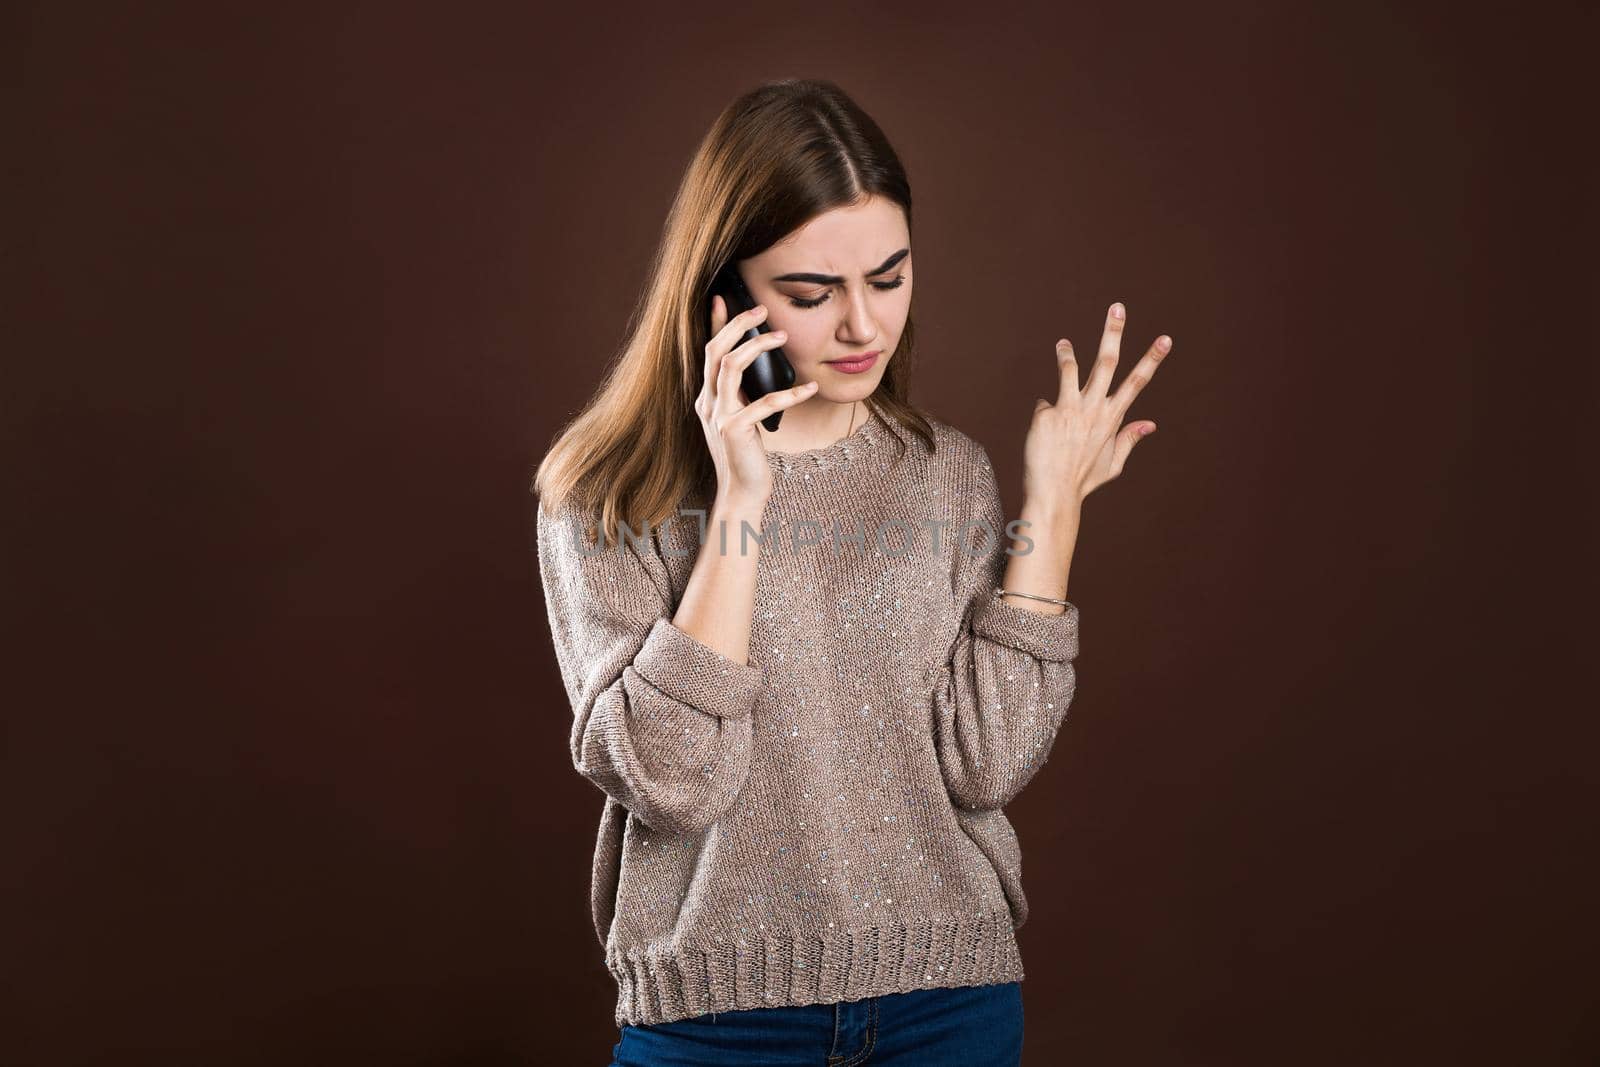 A girl swears on the phone on a brown background. by StudioPeace